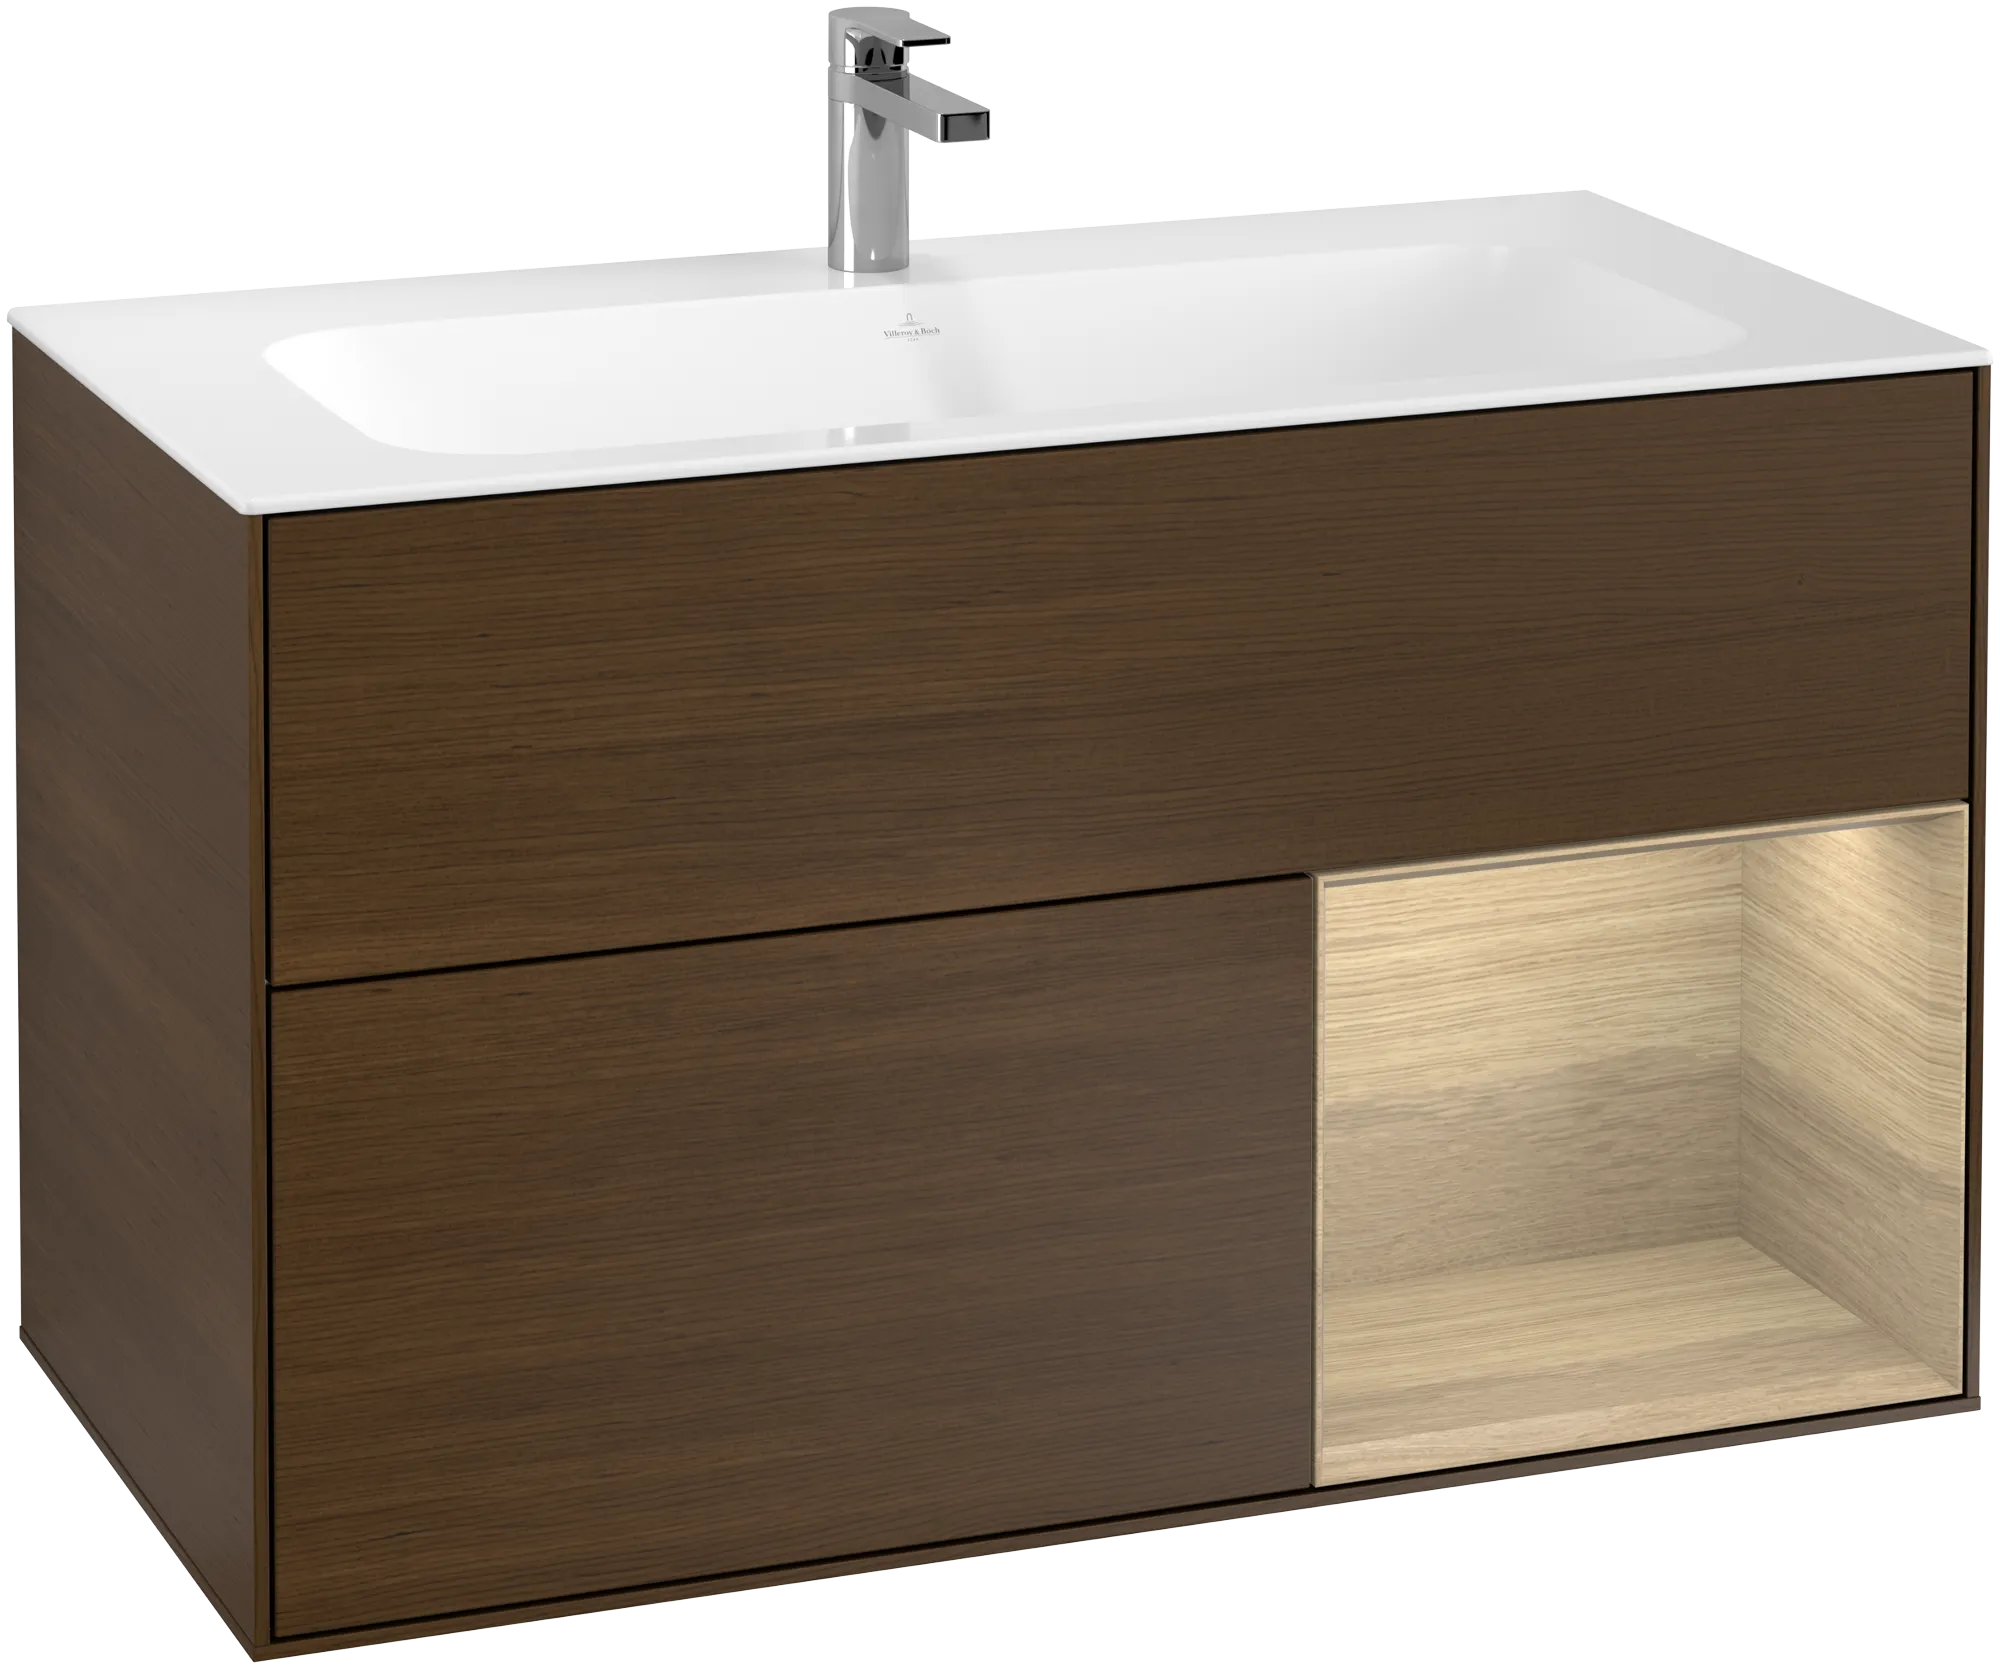 Picture of VILLEROY BOCH Finion Vanity unit, with lighting, 2 pull-out compartments, 996 x 591 x 498 mm, Walnut Veneer / Oak Veneer #G040PCGN